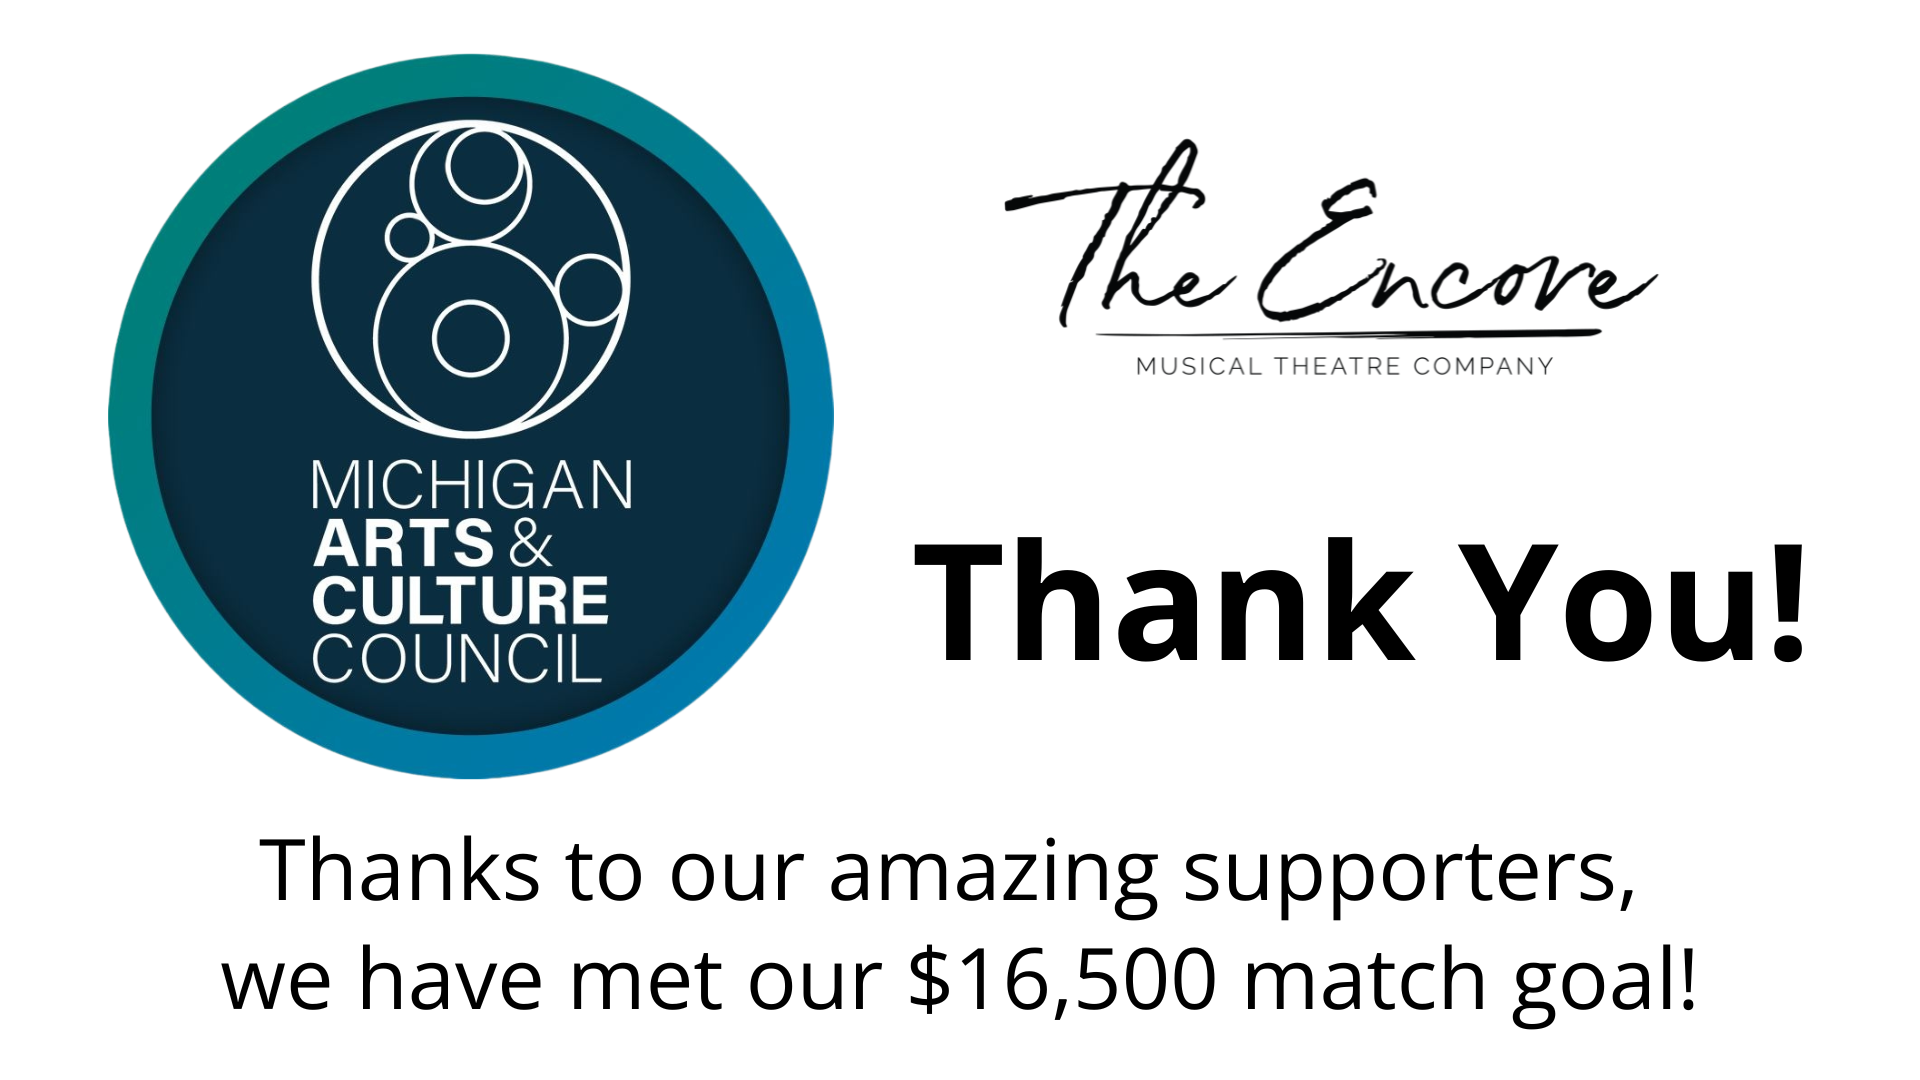 Thanks to the generosity of our amazing supporters we have met our $16,500 match goal to receive the Michigan Arts and Culture Council Grant!